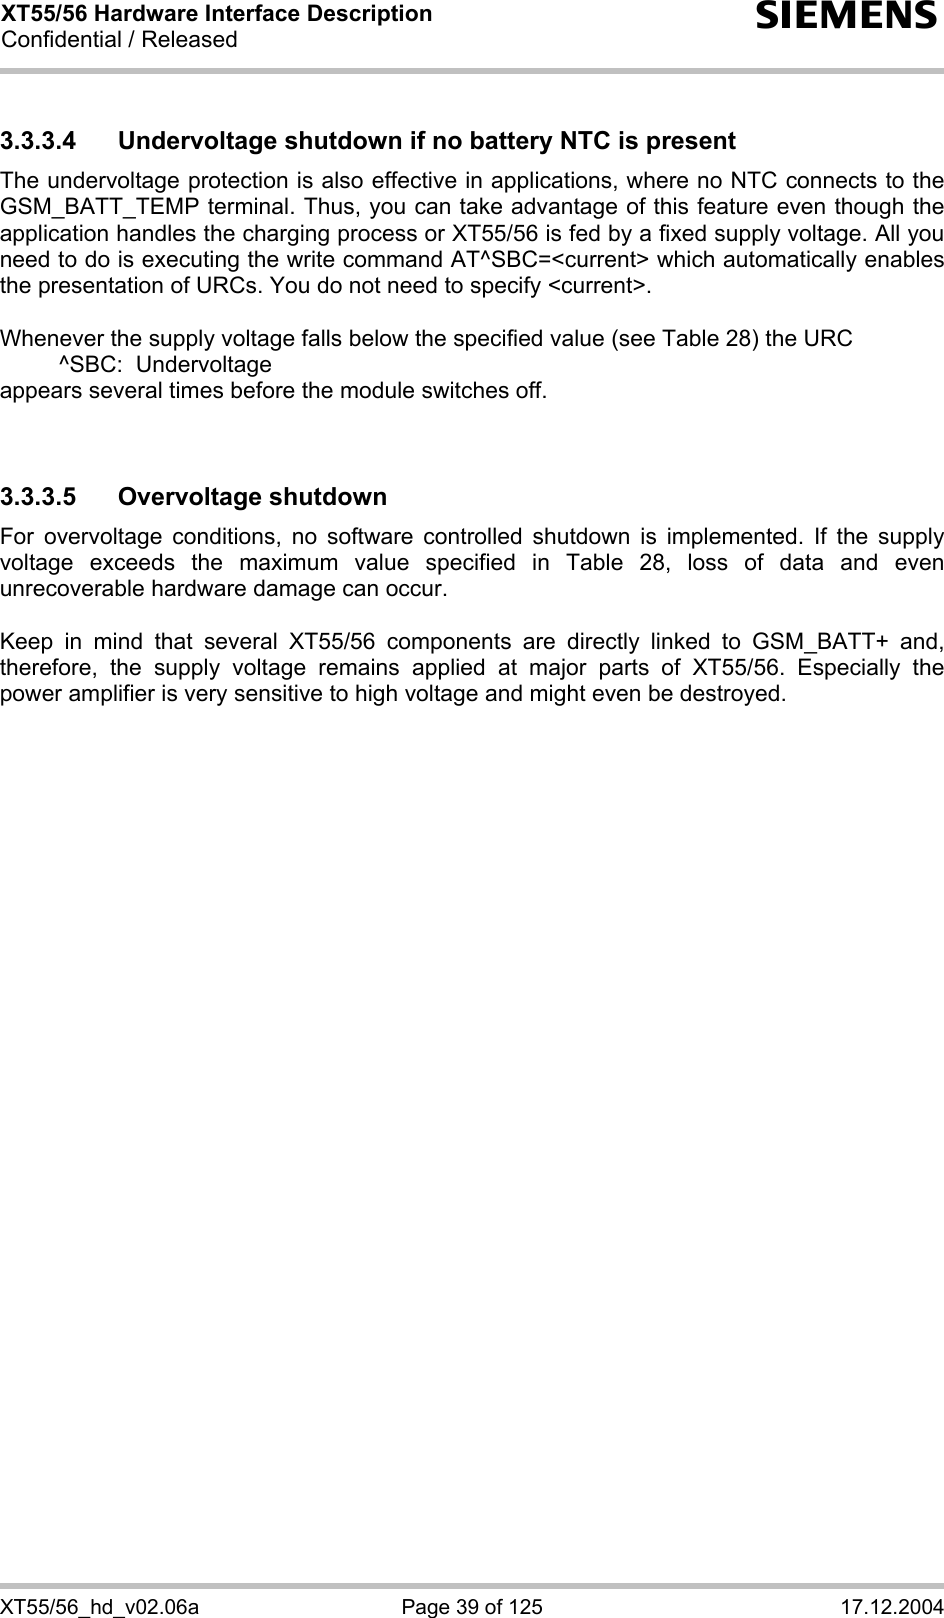 XT55/56 Hardware Interface Description Confidential / Released s XT55/56_hd_v02.06a  Page 39 of 125  17.12.2004 3.3.3.4  Undervoltage shutdown if no battery NTC is present The undervoltage protection is also effective in applications, where no NTC connects to the GSM_BATT_TEMP terminal. Thus, you can take advantage of this feature even though the application handles the charging process or XT55/56 is fed by a fixed supply voltage. All you need to do is executing the write command AT^SBC=&lt;current&gt; which automatically enables the presentation of URCs. You do not need to specify &lt;current&gt;.   Whenever the supply voltage falls below the specified value (see Table 28) the URC    ^SBC:  Undervoltage appears several times before the module switches off.   3.3.3.5 Overvoltage shutdown For overvoltage conditions, no software controlled shutdown is implemented. If the supply voltage exceeds the maximum value specified in Table 28, loss of data and even unrecoverable hardware damage can occur.   Keep in mind that several XT55/56 components are directly linked to GSM_BATT+ and, therefore, the supply voltage remains applied at major parts of XT55/56. Especially the power amplifier is very sensitive to high voltage and might even be destroyed.     